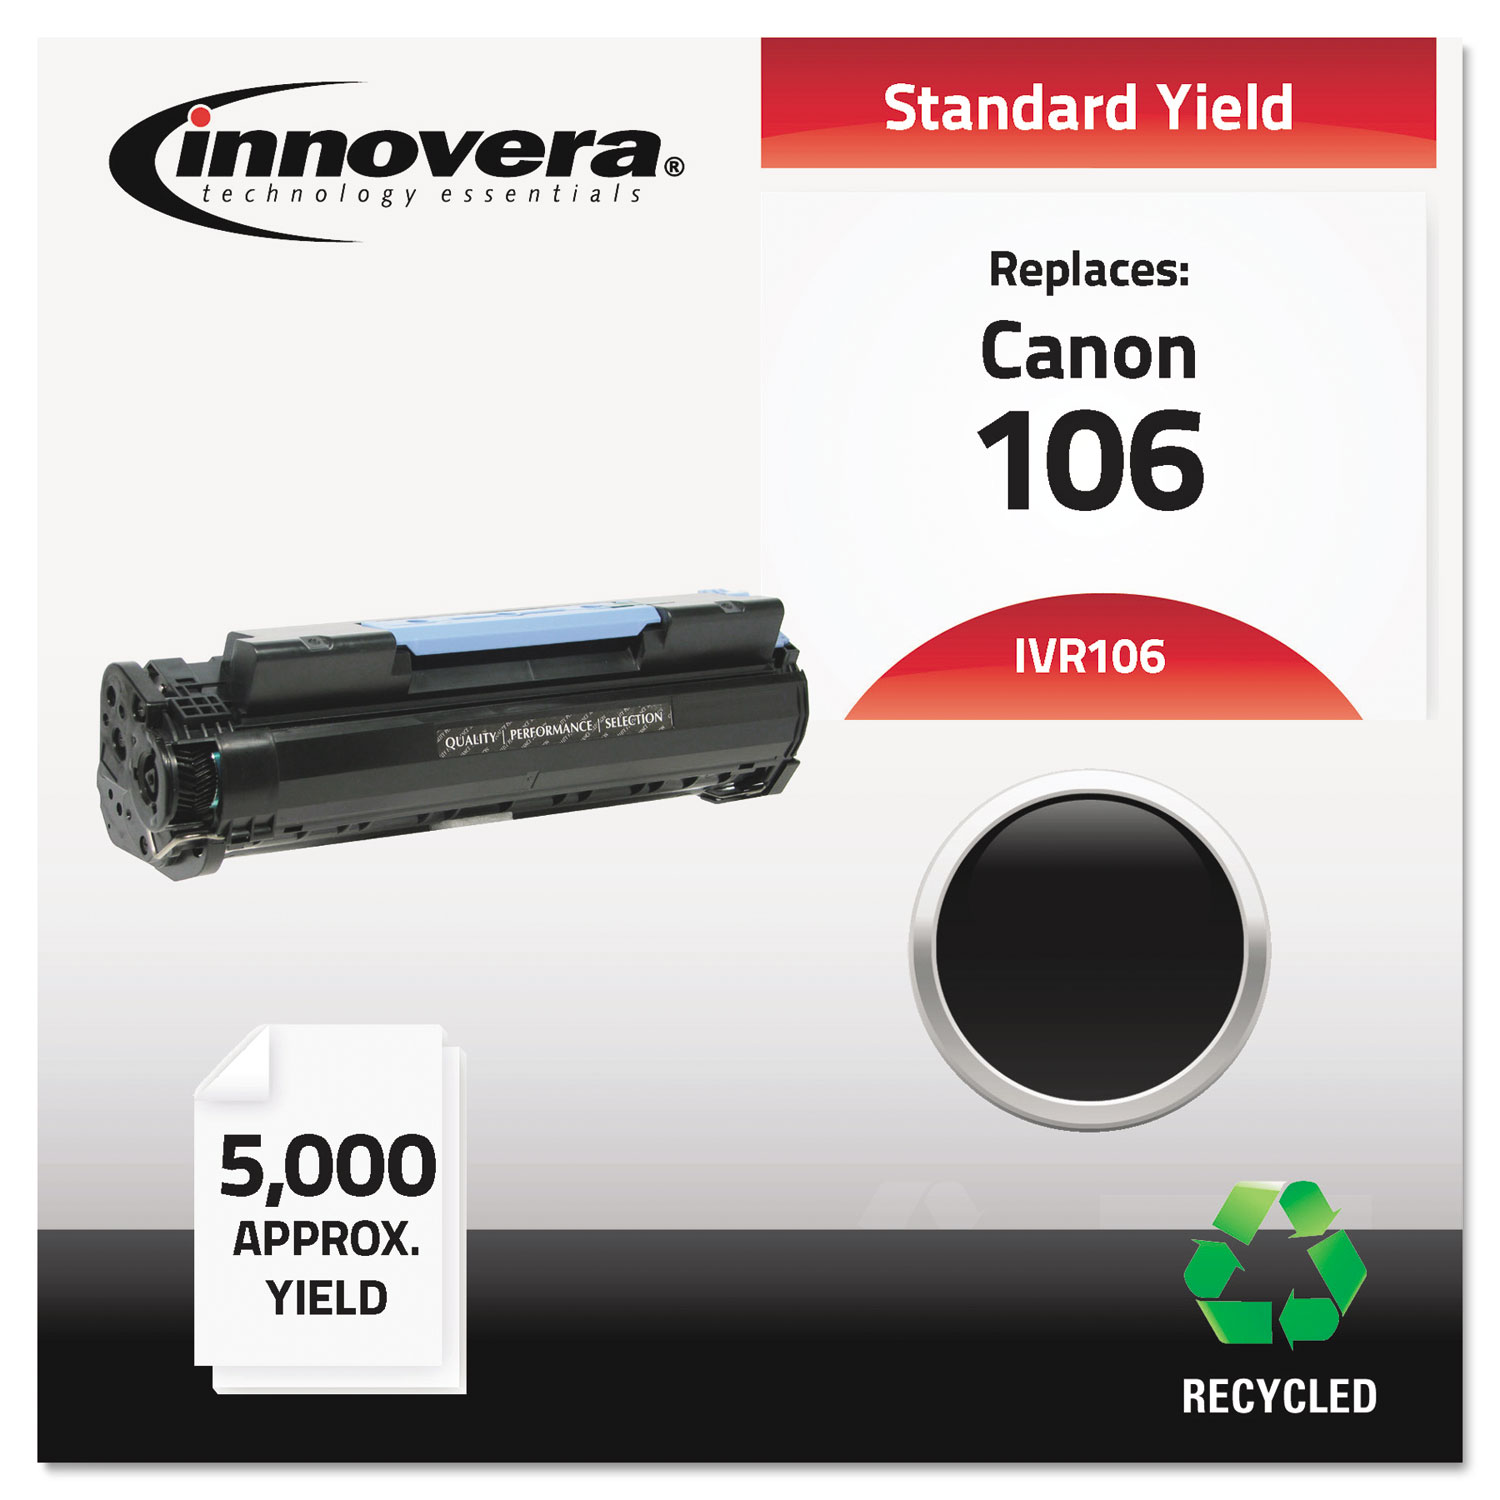 Remanufactured 0264B001 (106) Toner, 5000 Page-Yield, Black